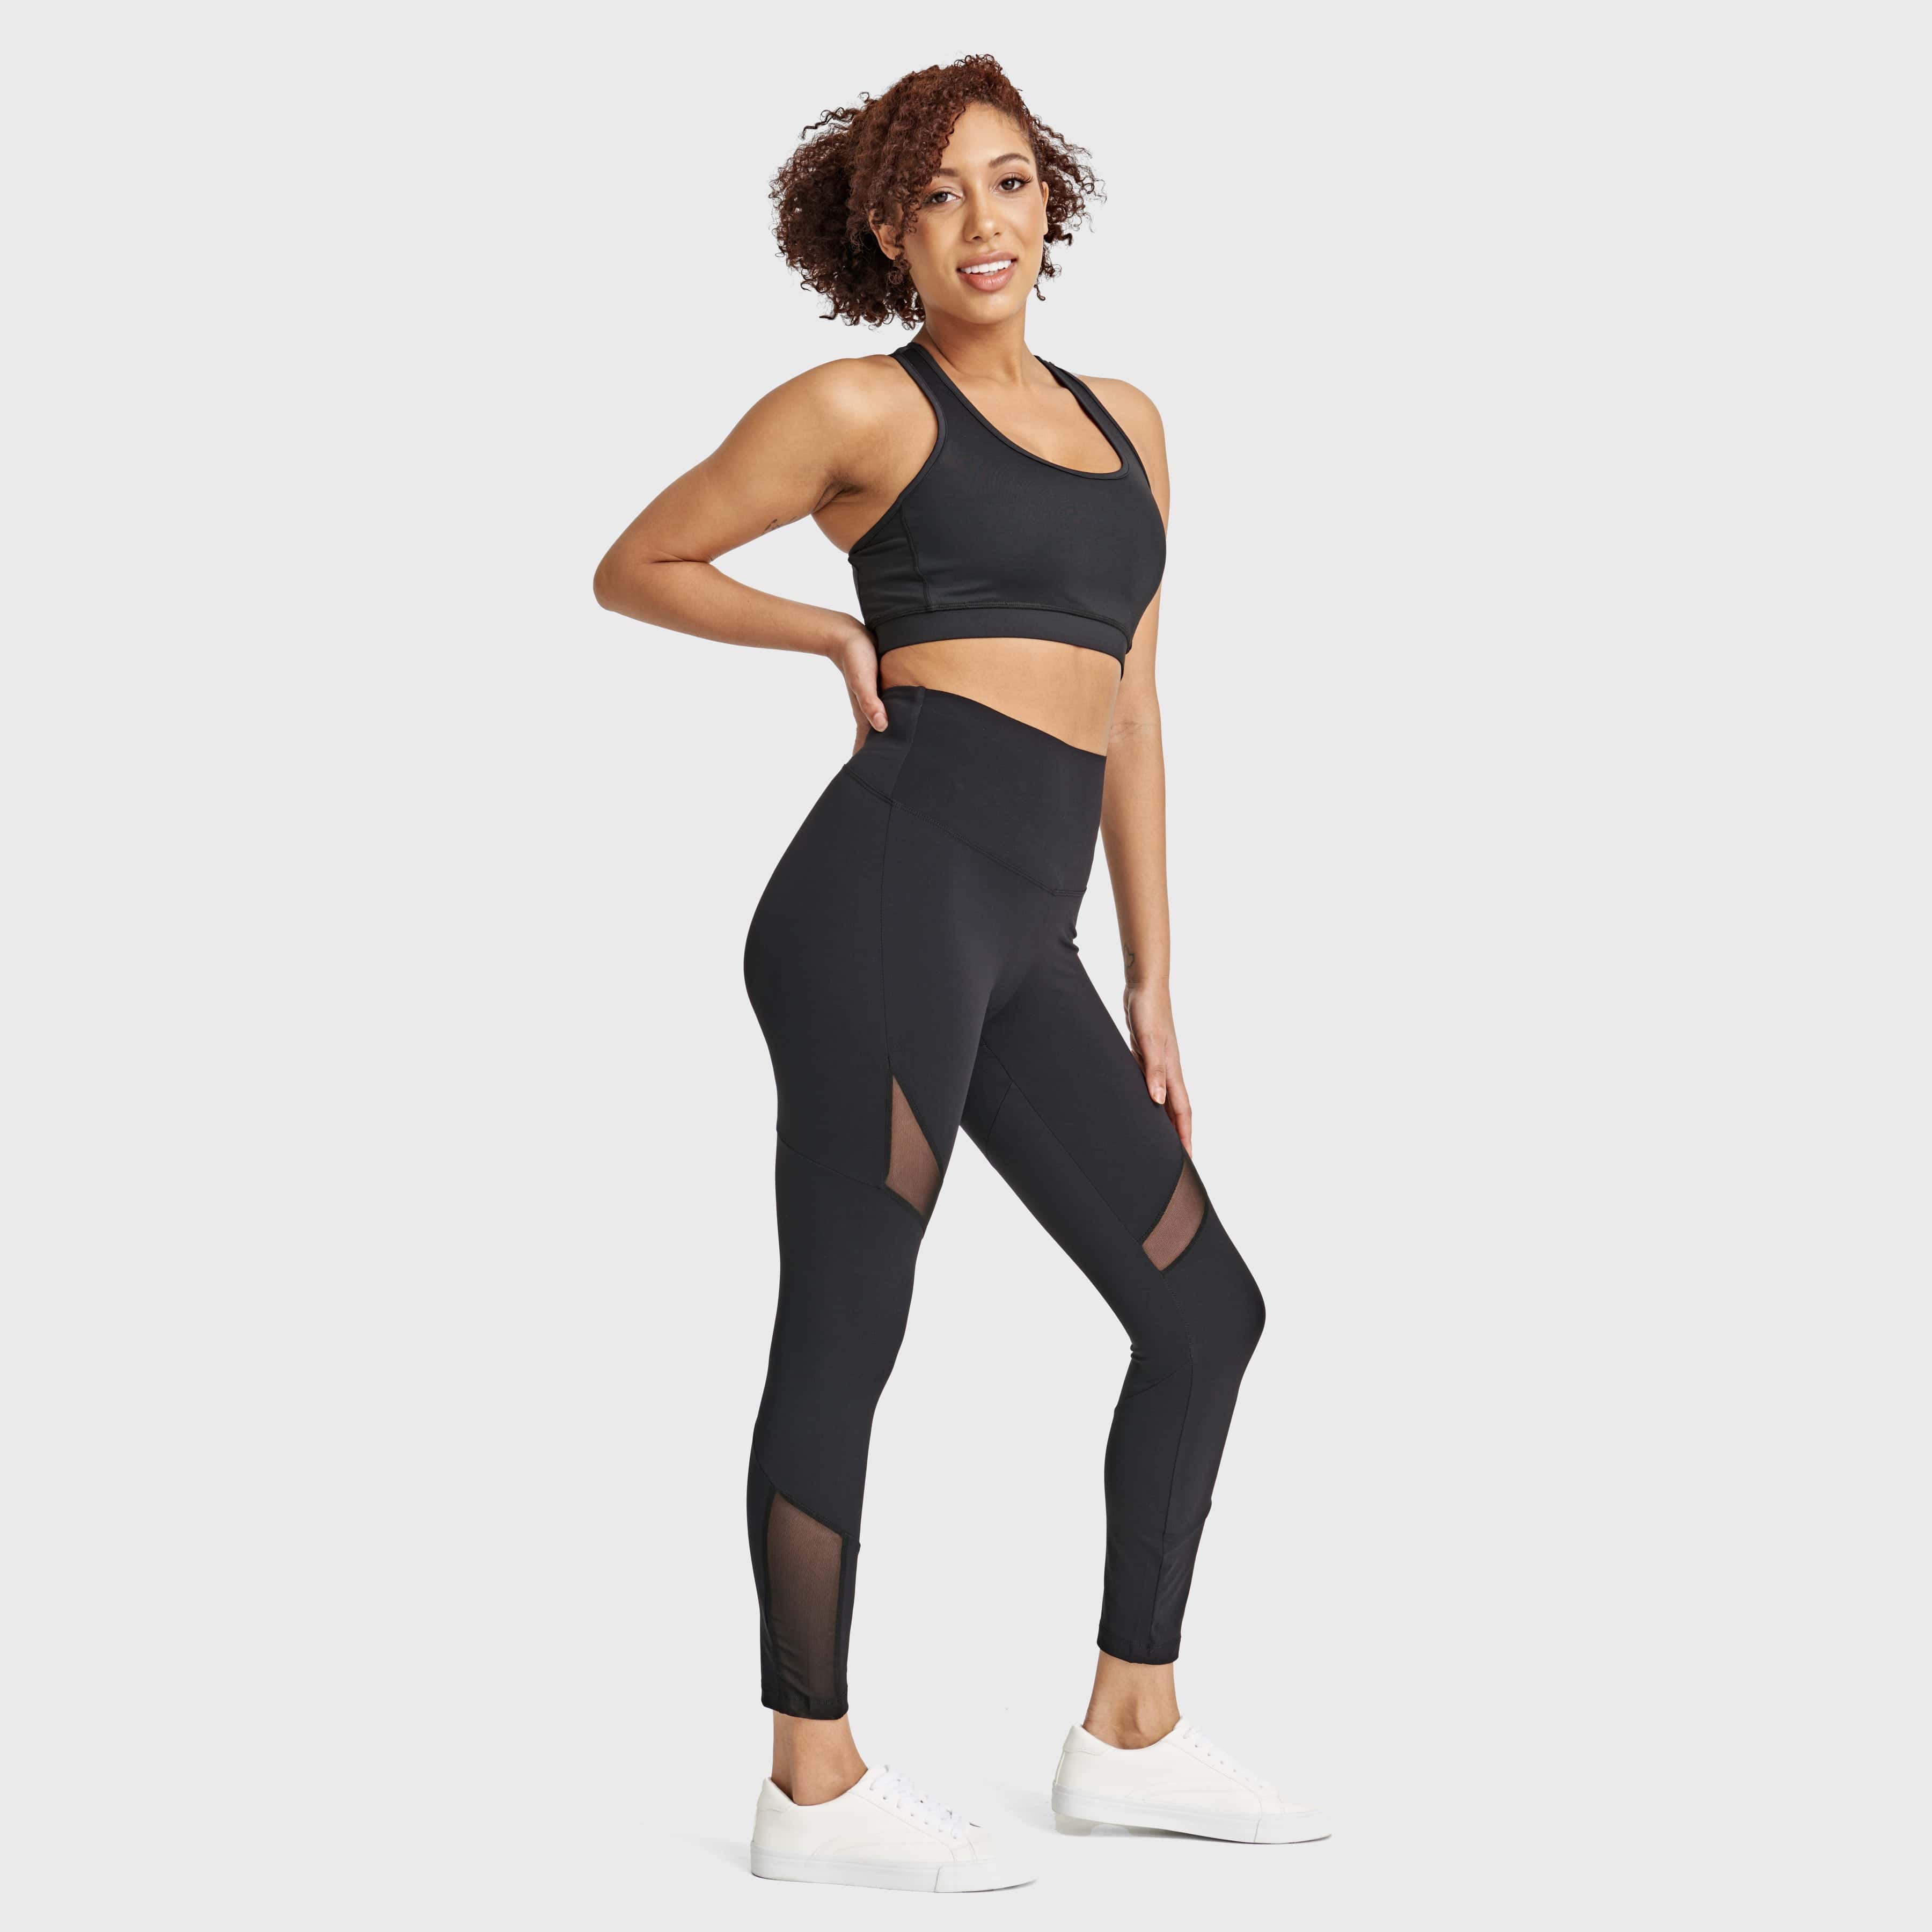 Superfit Diwo Pro With Mesh Detailing - High Waisted - Petite Length - Black 2